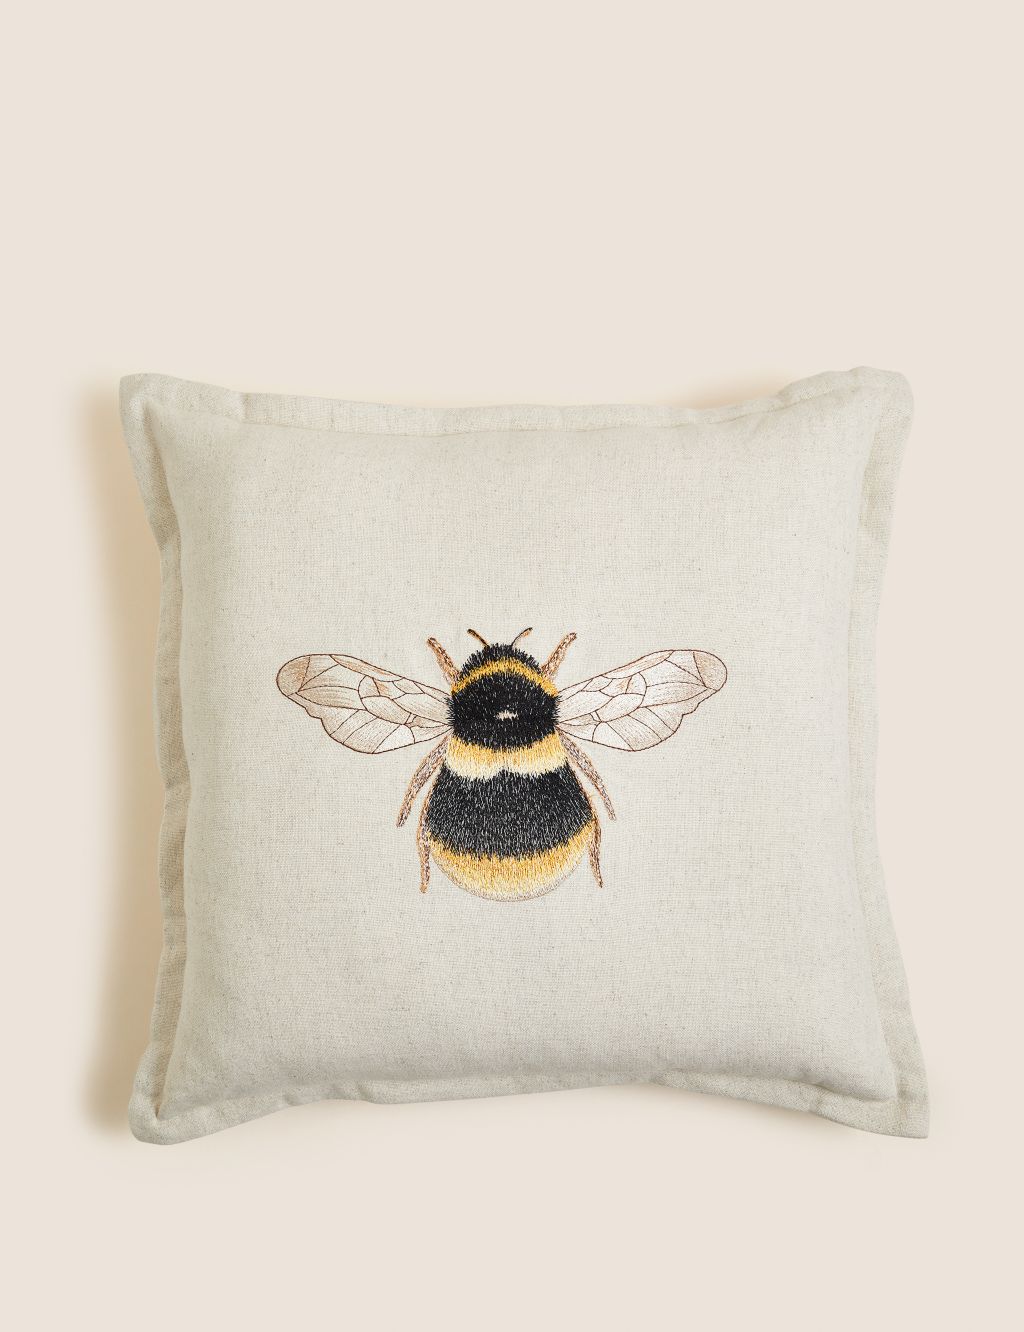 Linen Blend Bee Embroidered Cushion image 1